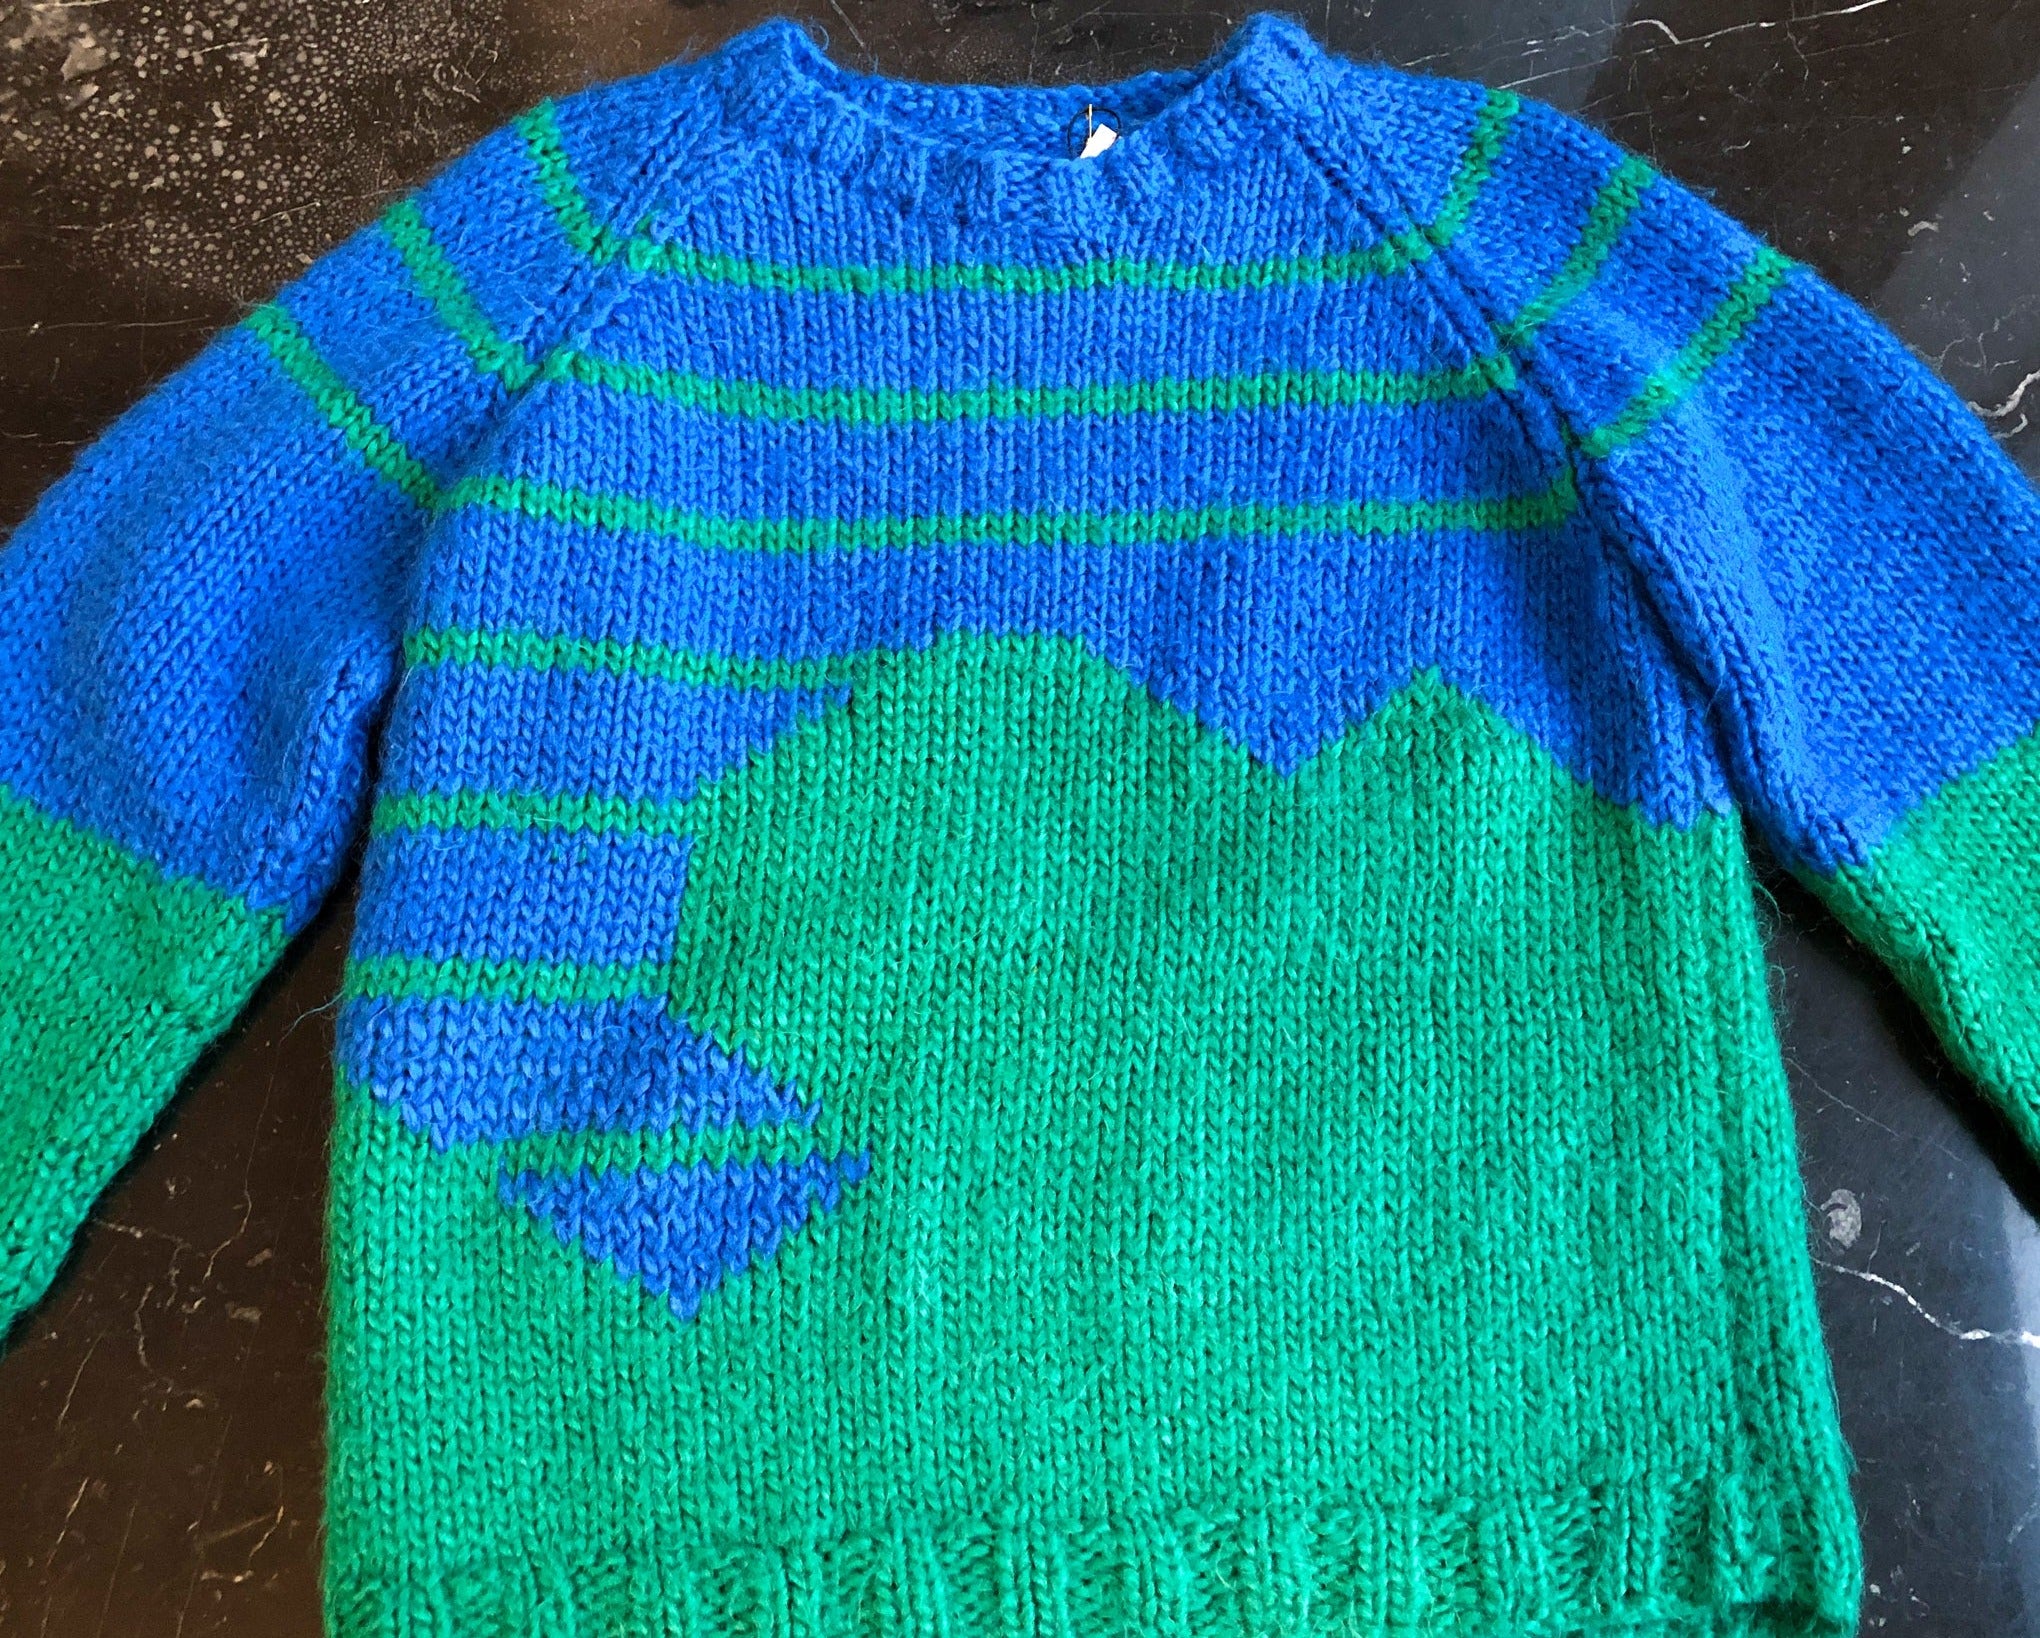 Hand Knit Chunky Wool Sweater in Bright Green and Blue with Stripes and Abstract Pattern